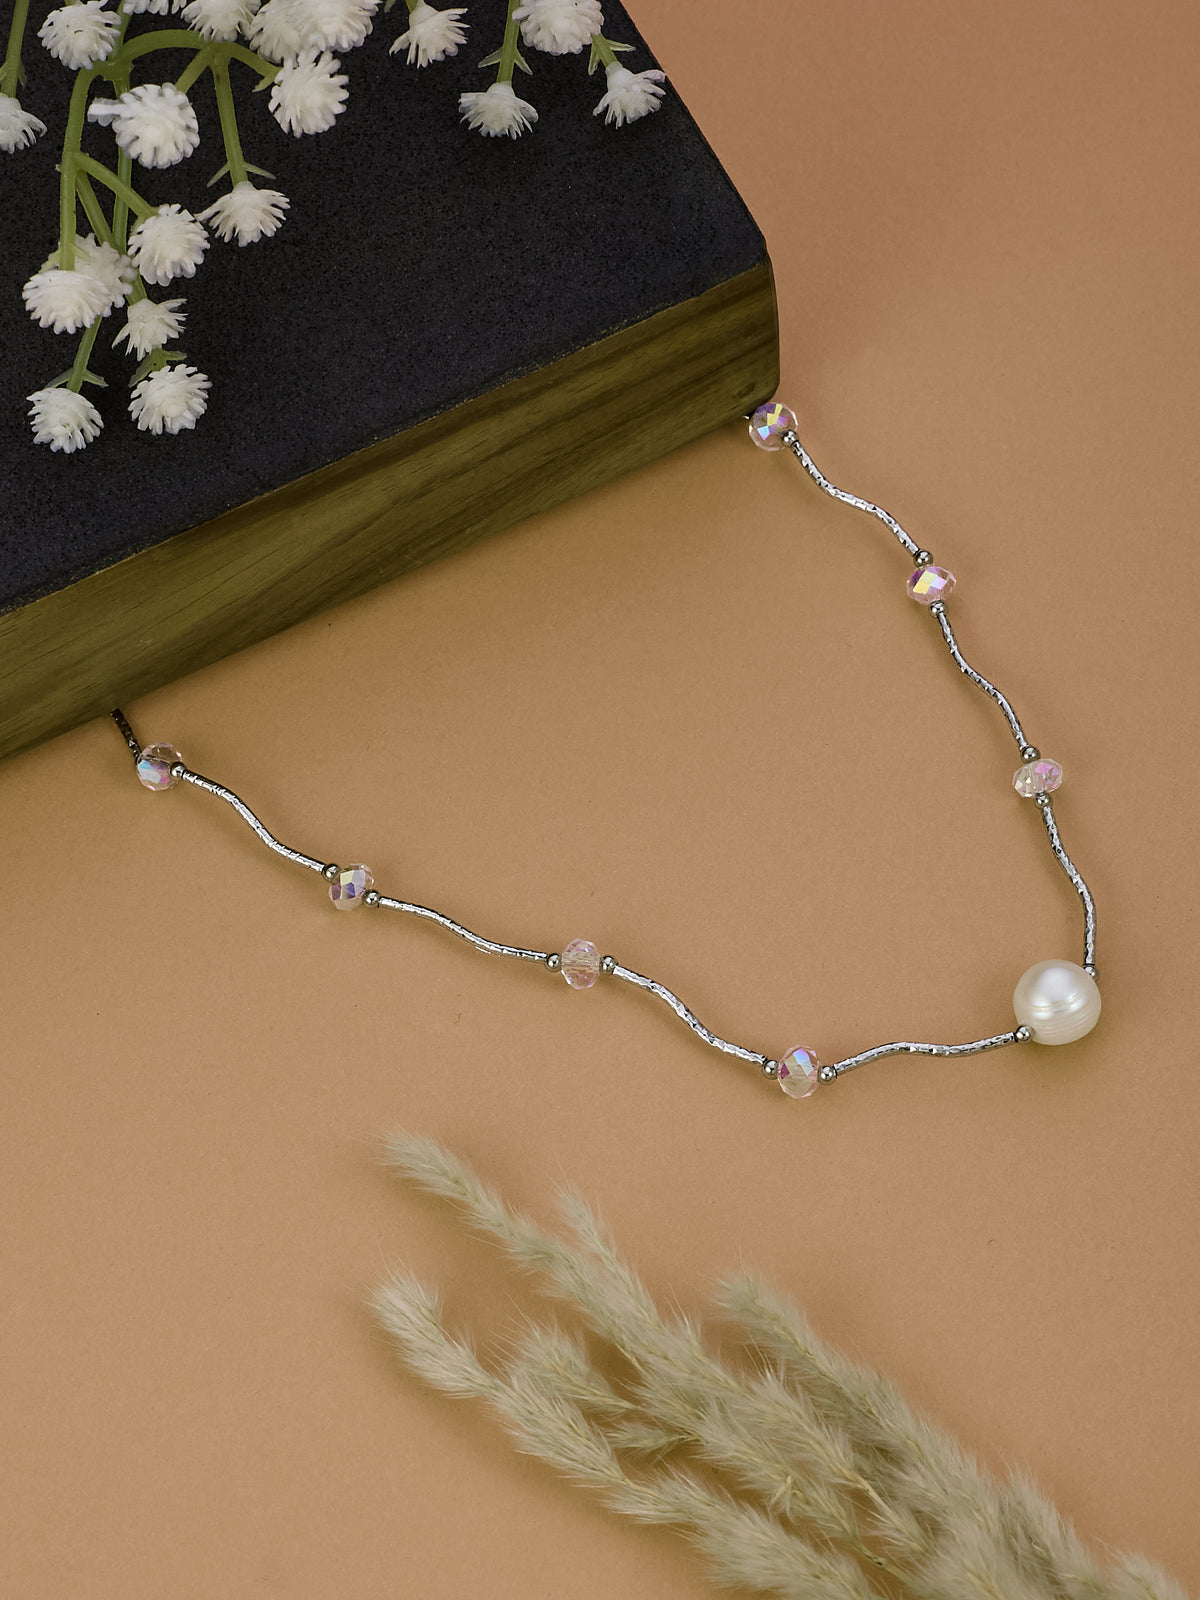 Stylish & Lightweight Silver Plated & Pearl Necklace for women & girls